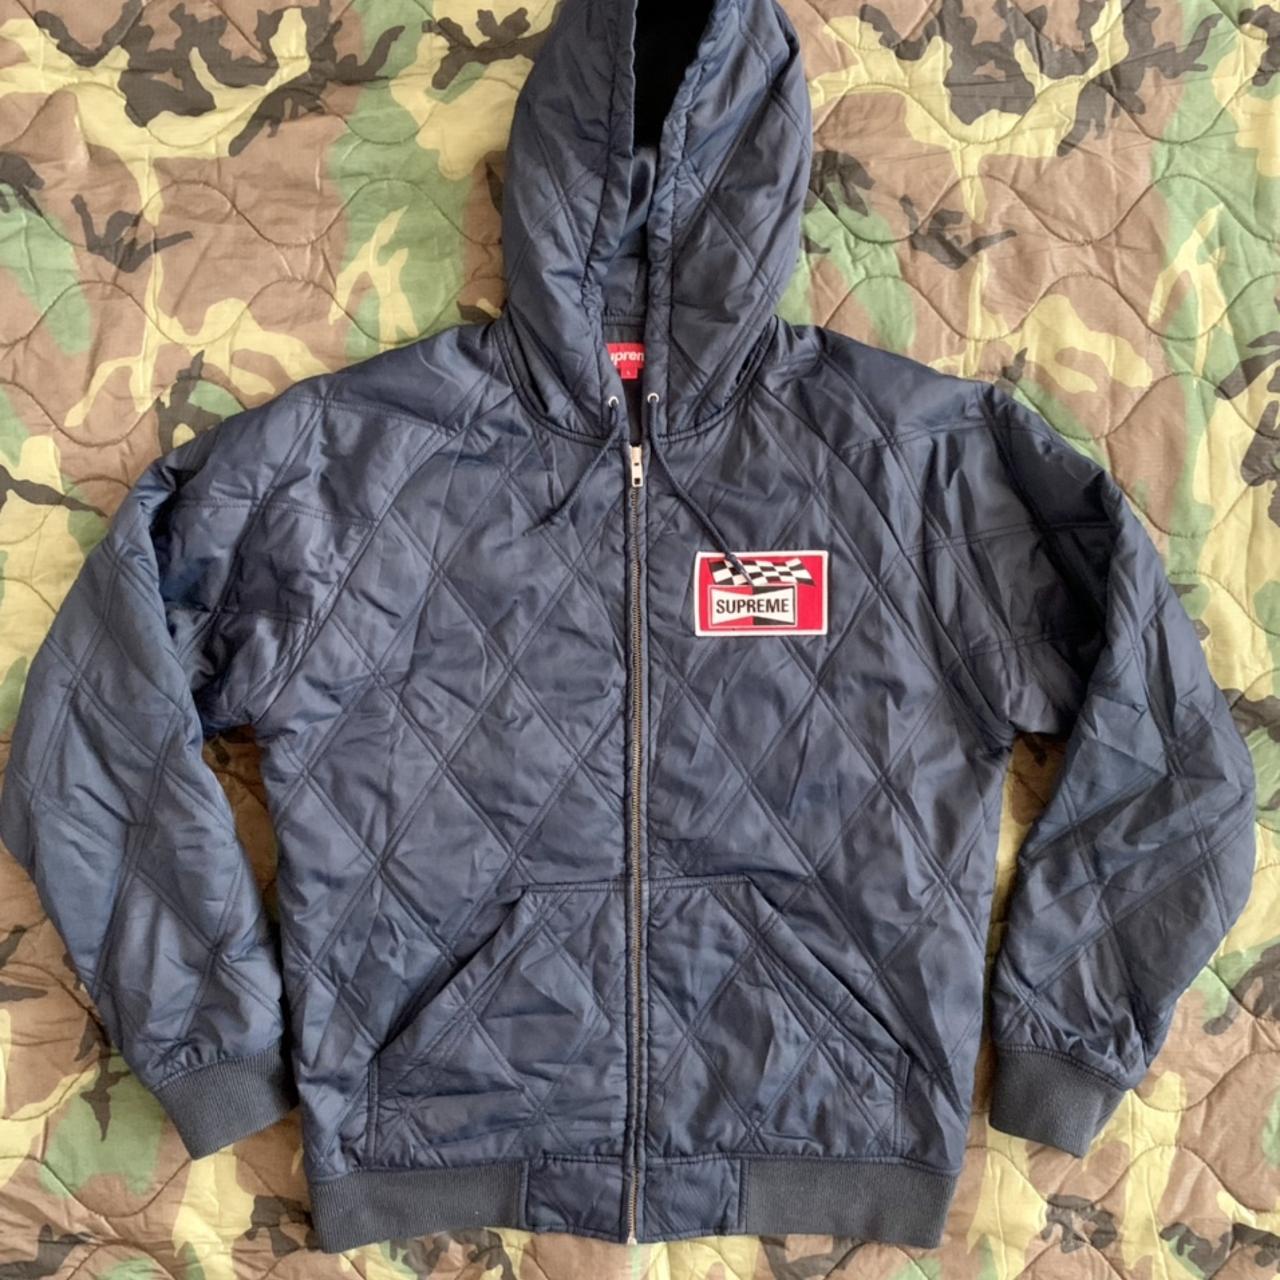 OFFICIAL SUPREME HOODED NYLON ZIP JACKET. GENTLY...